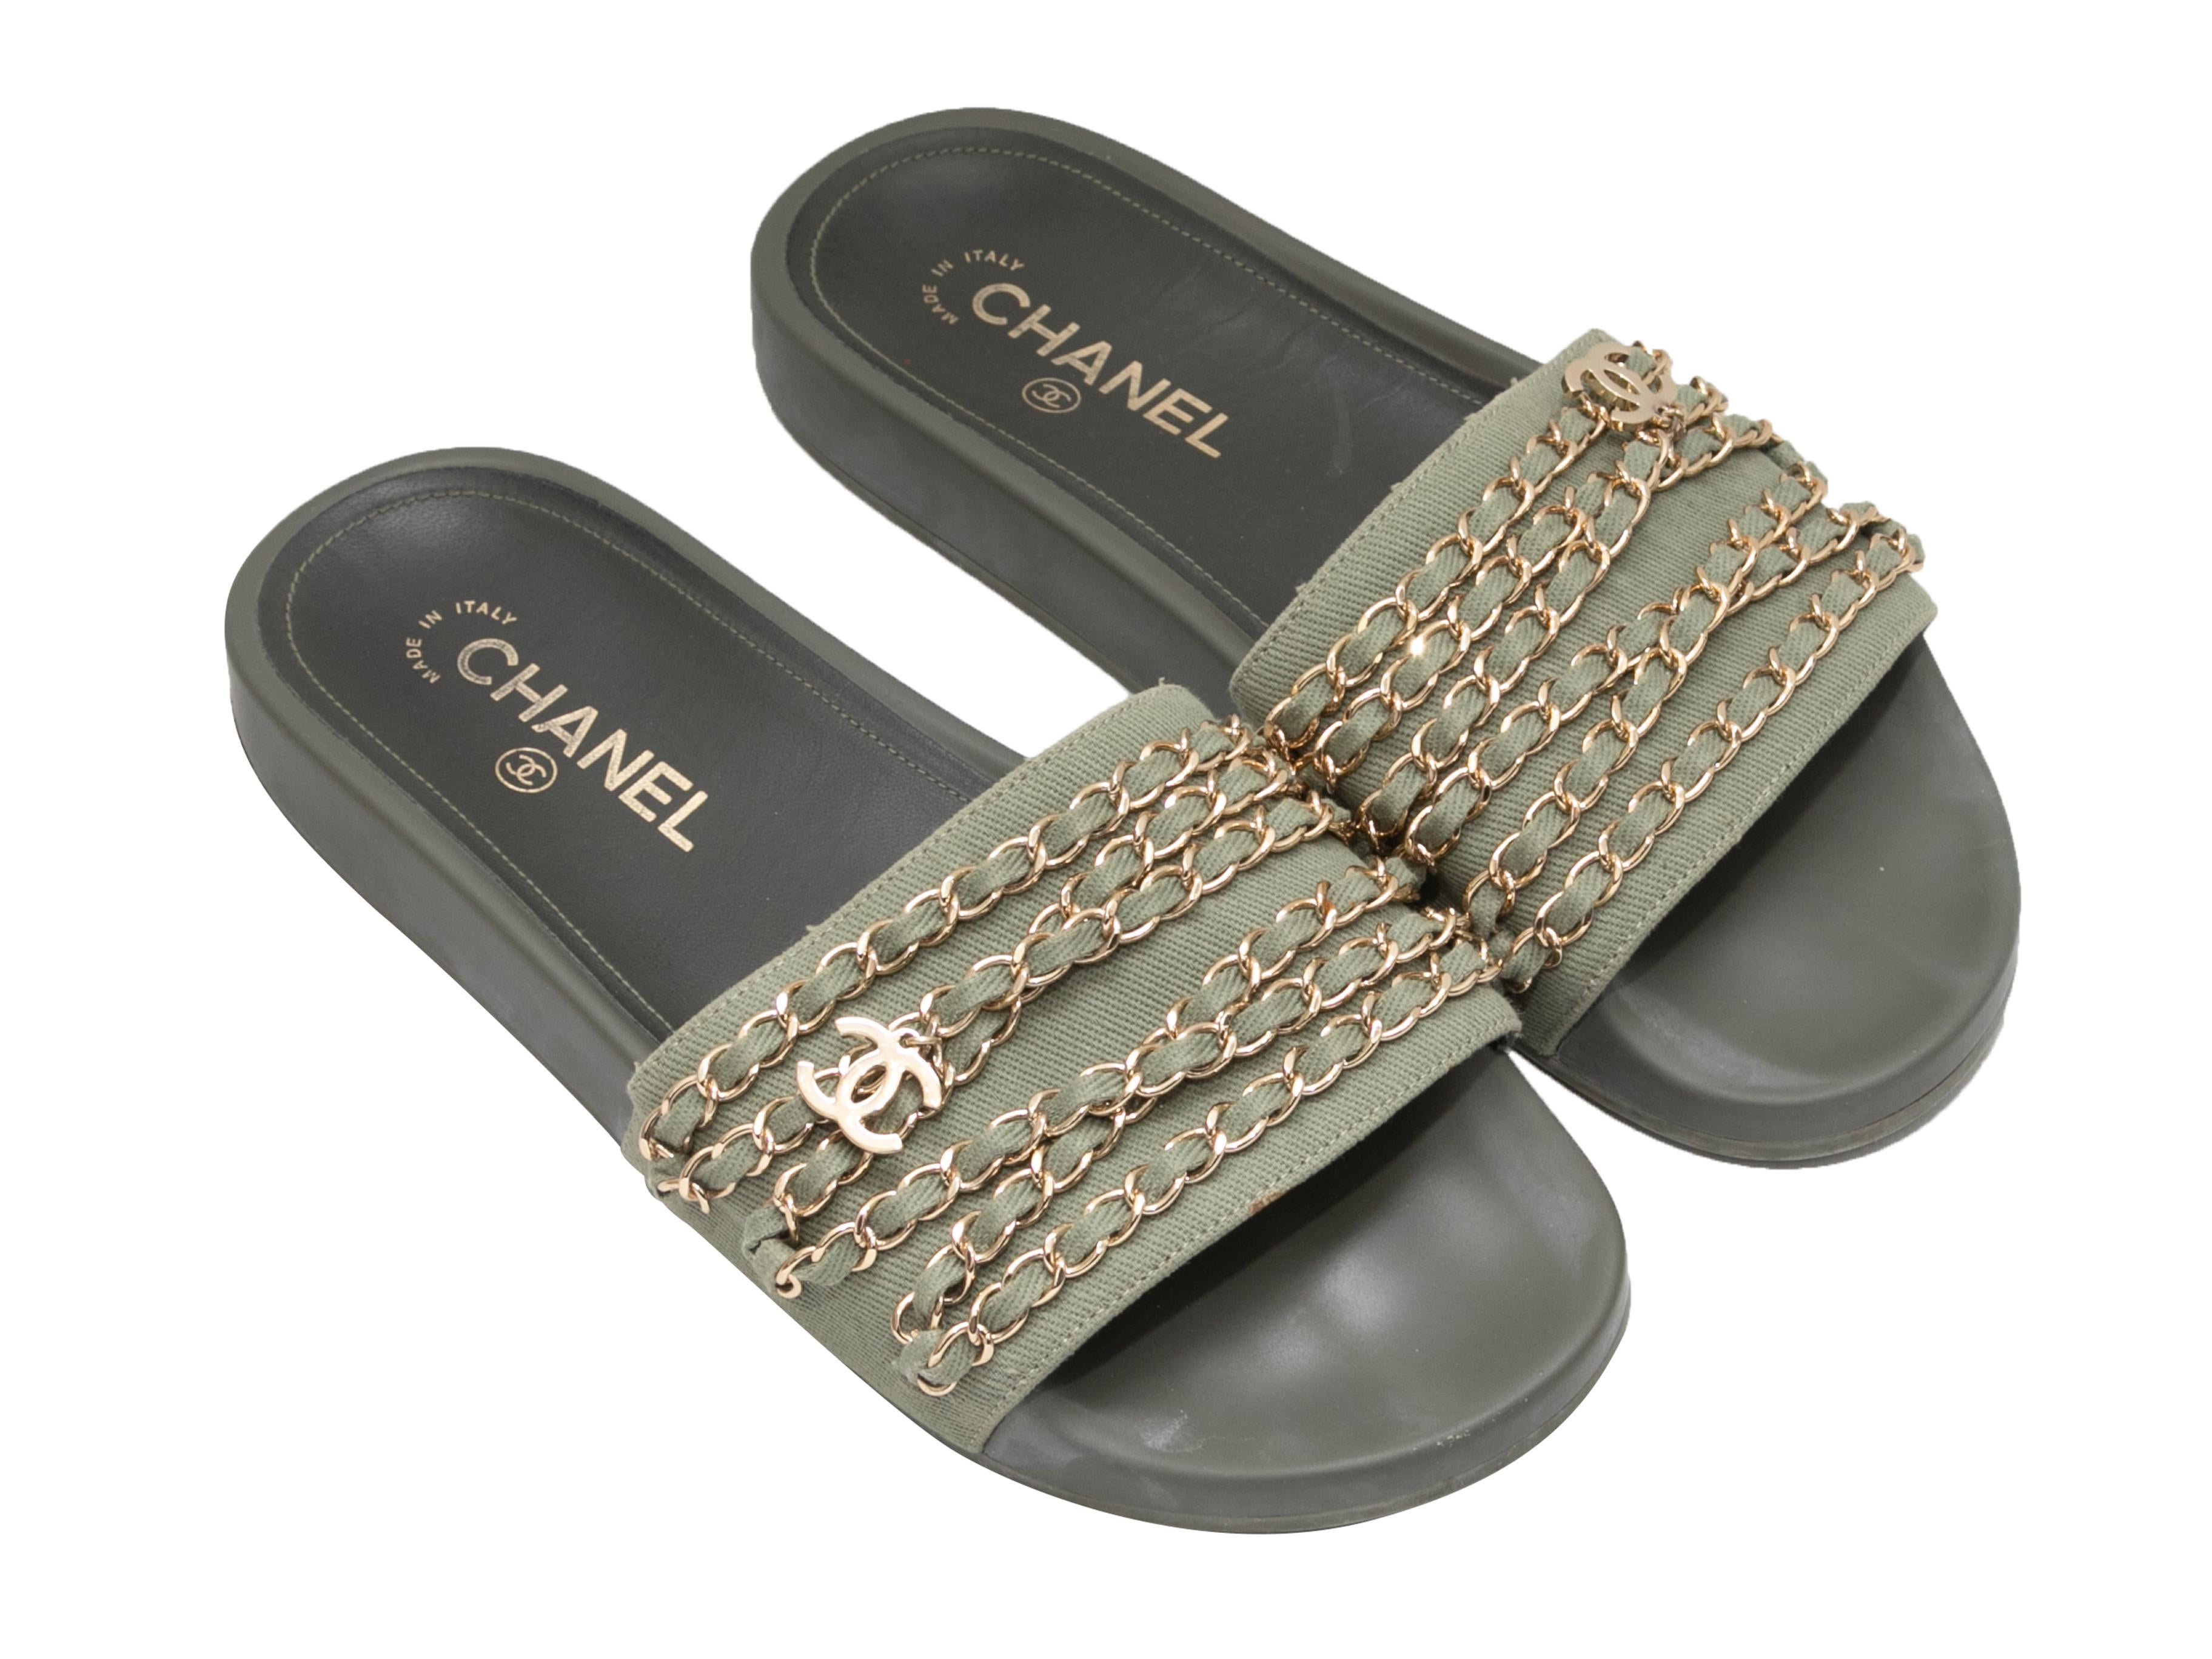 Olive canvas chain-accented slide sandals by Chanel. Rubber soles. 1